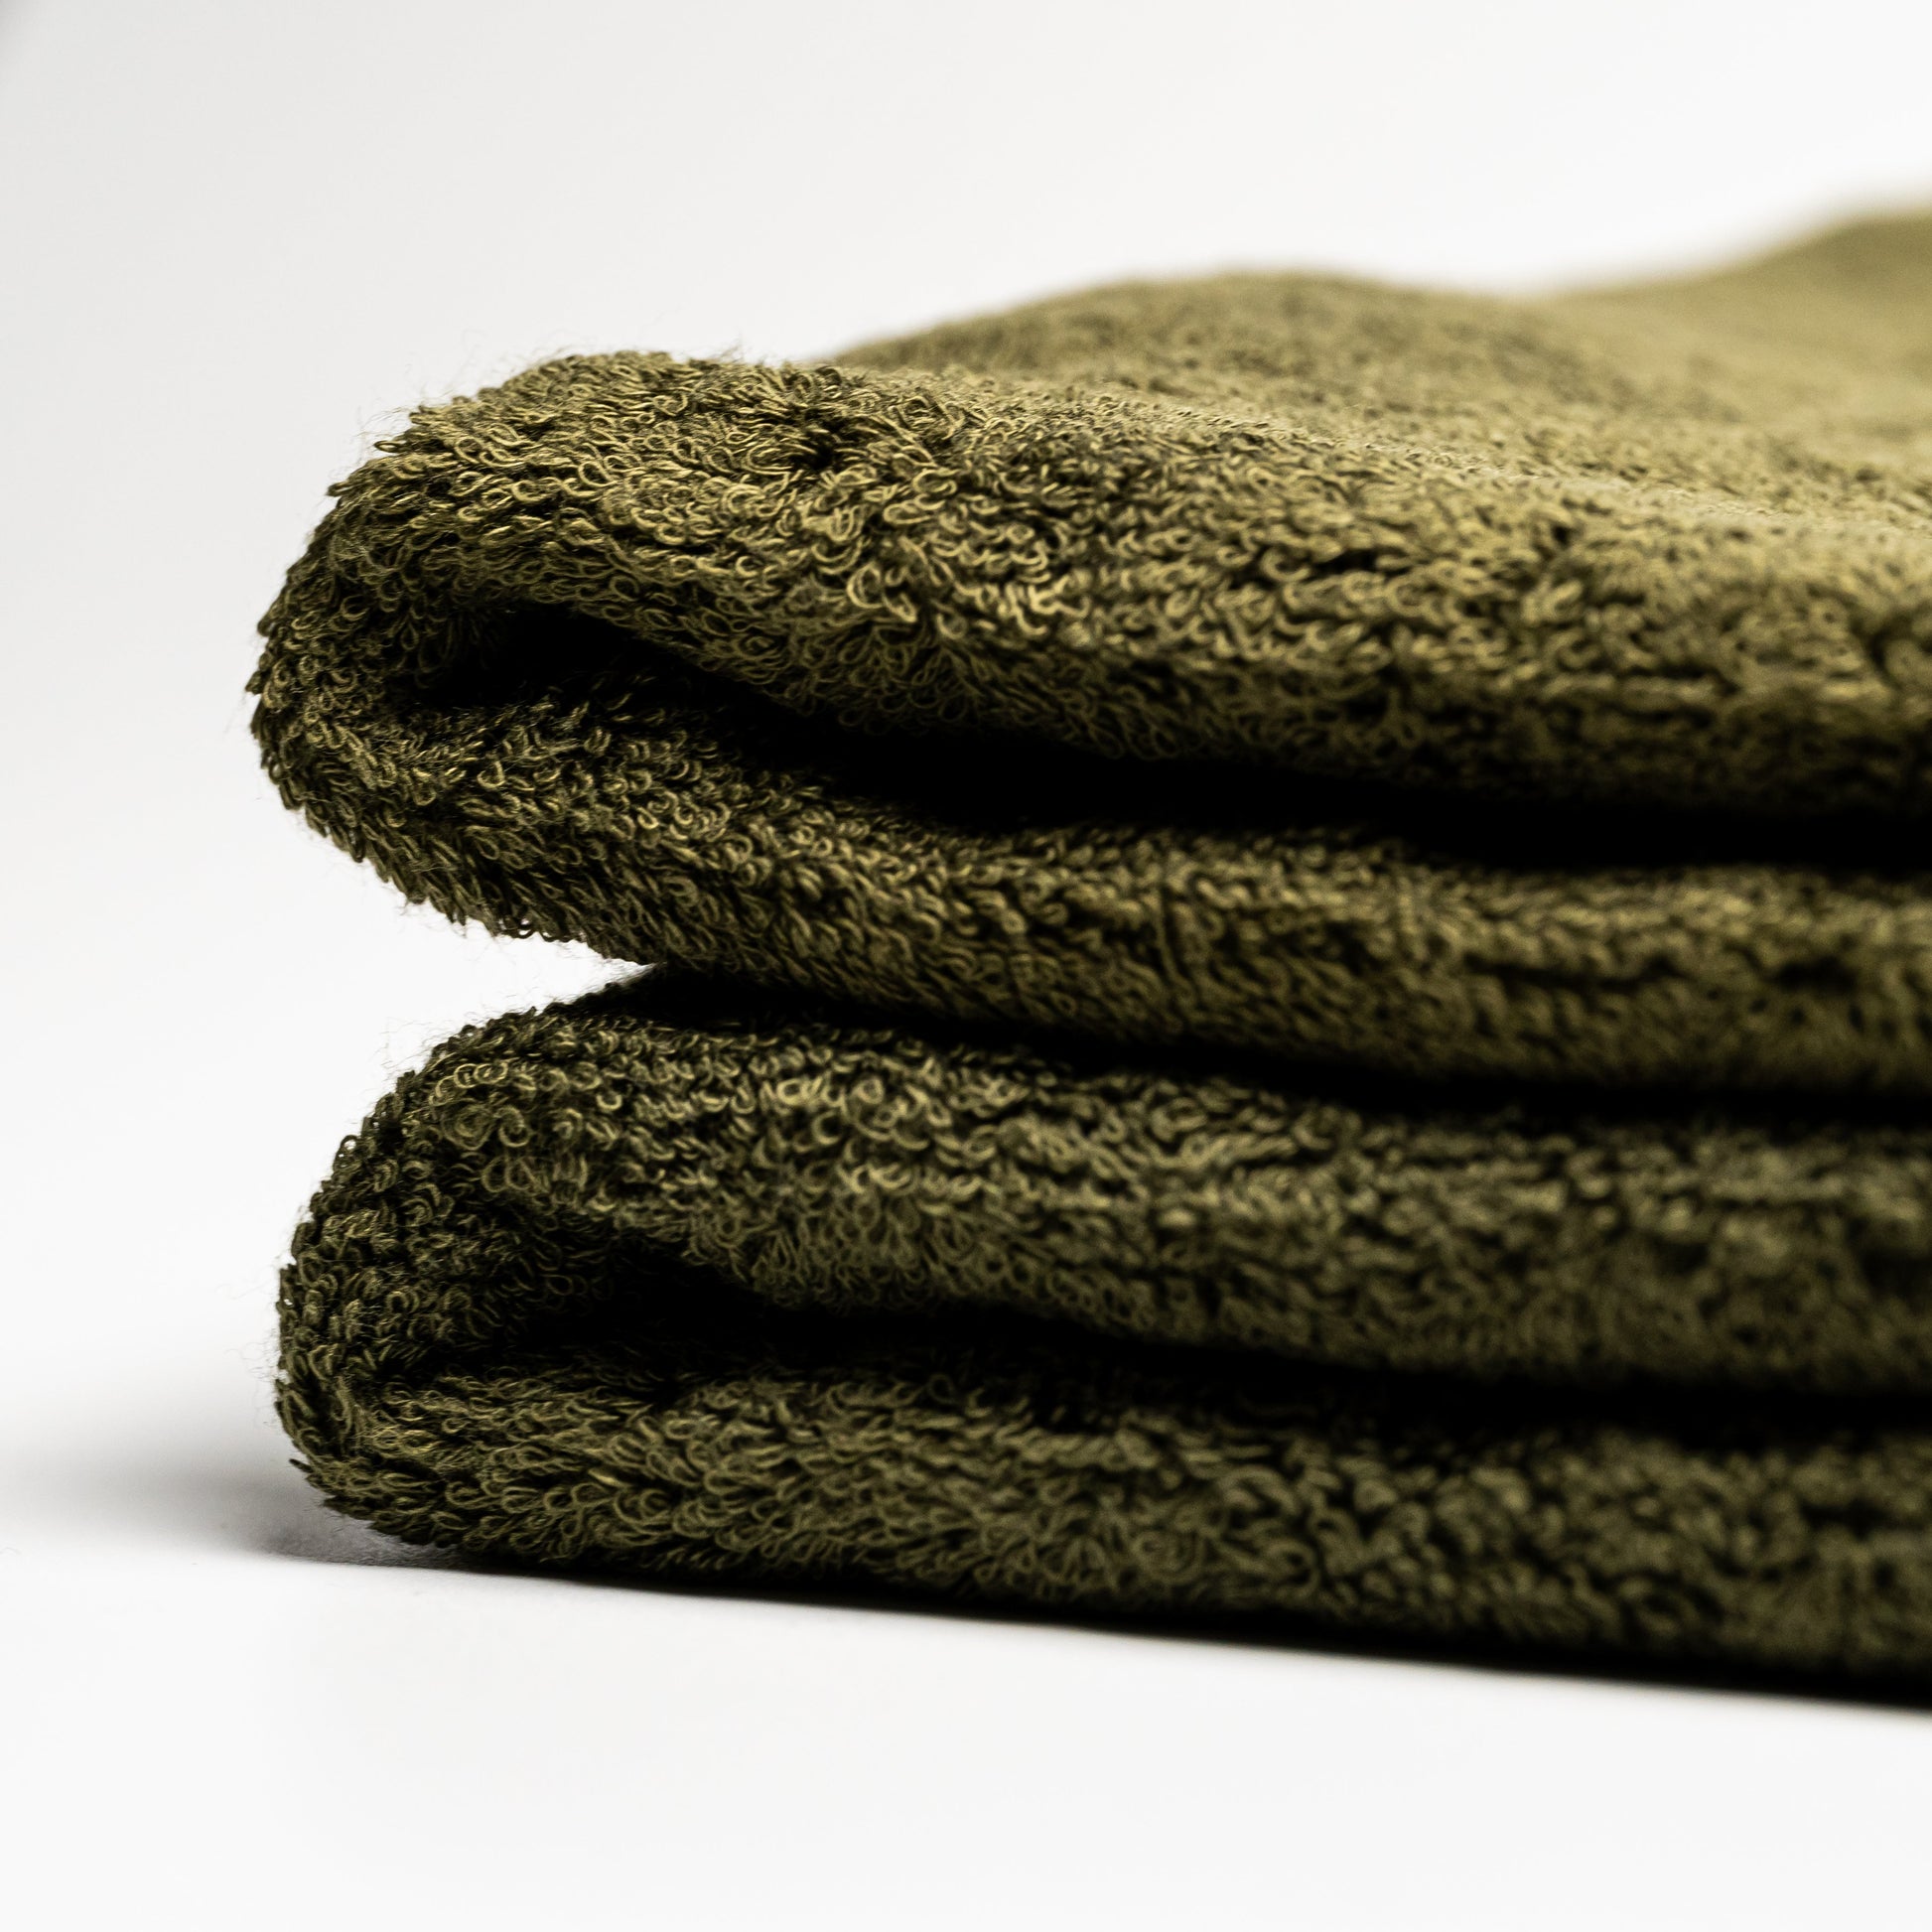 Green Filhiba face towels on a white background